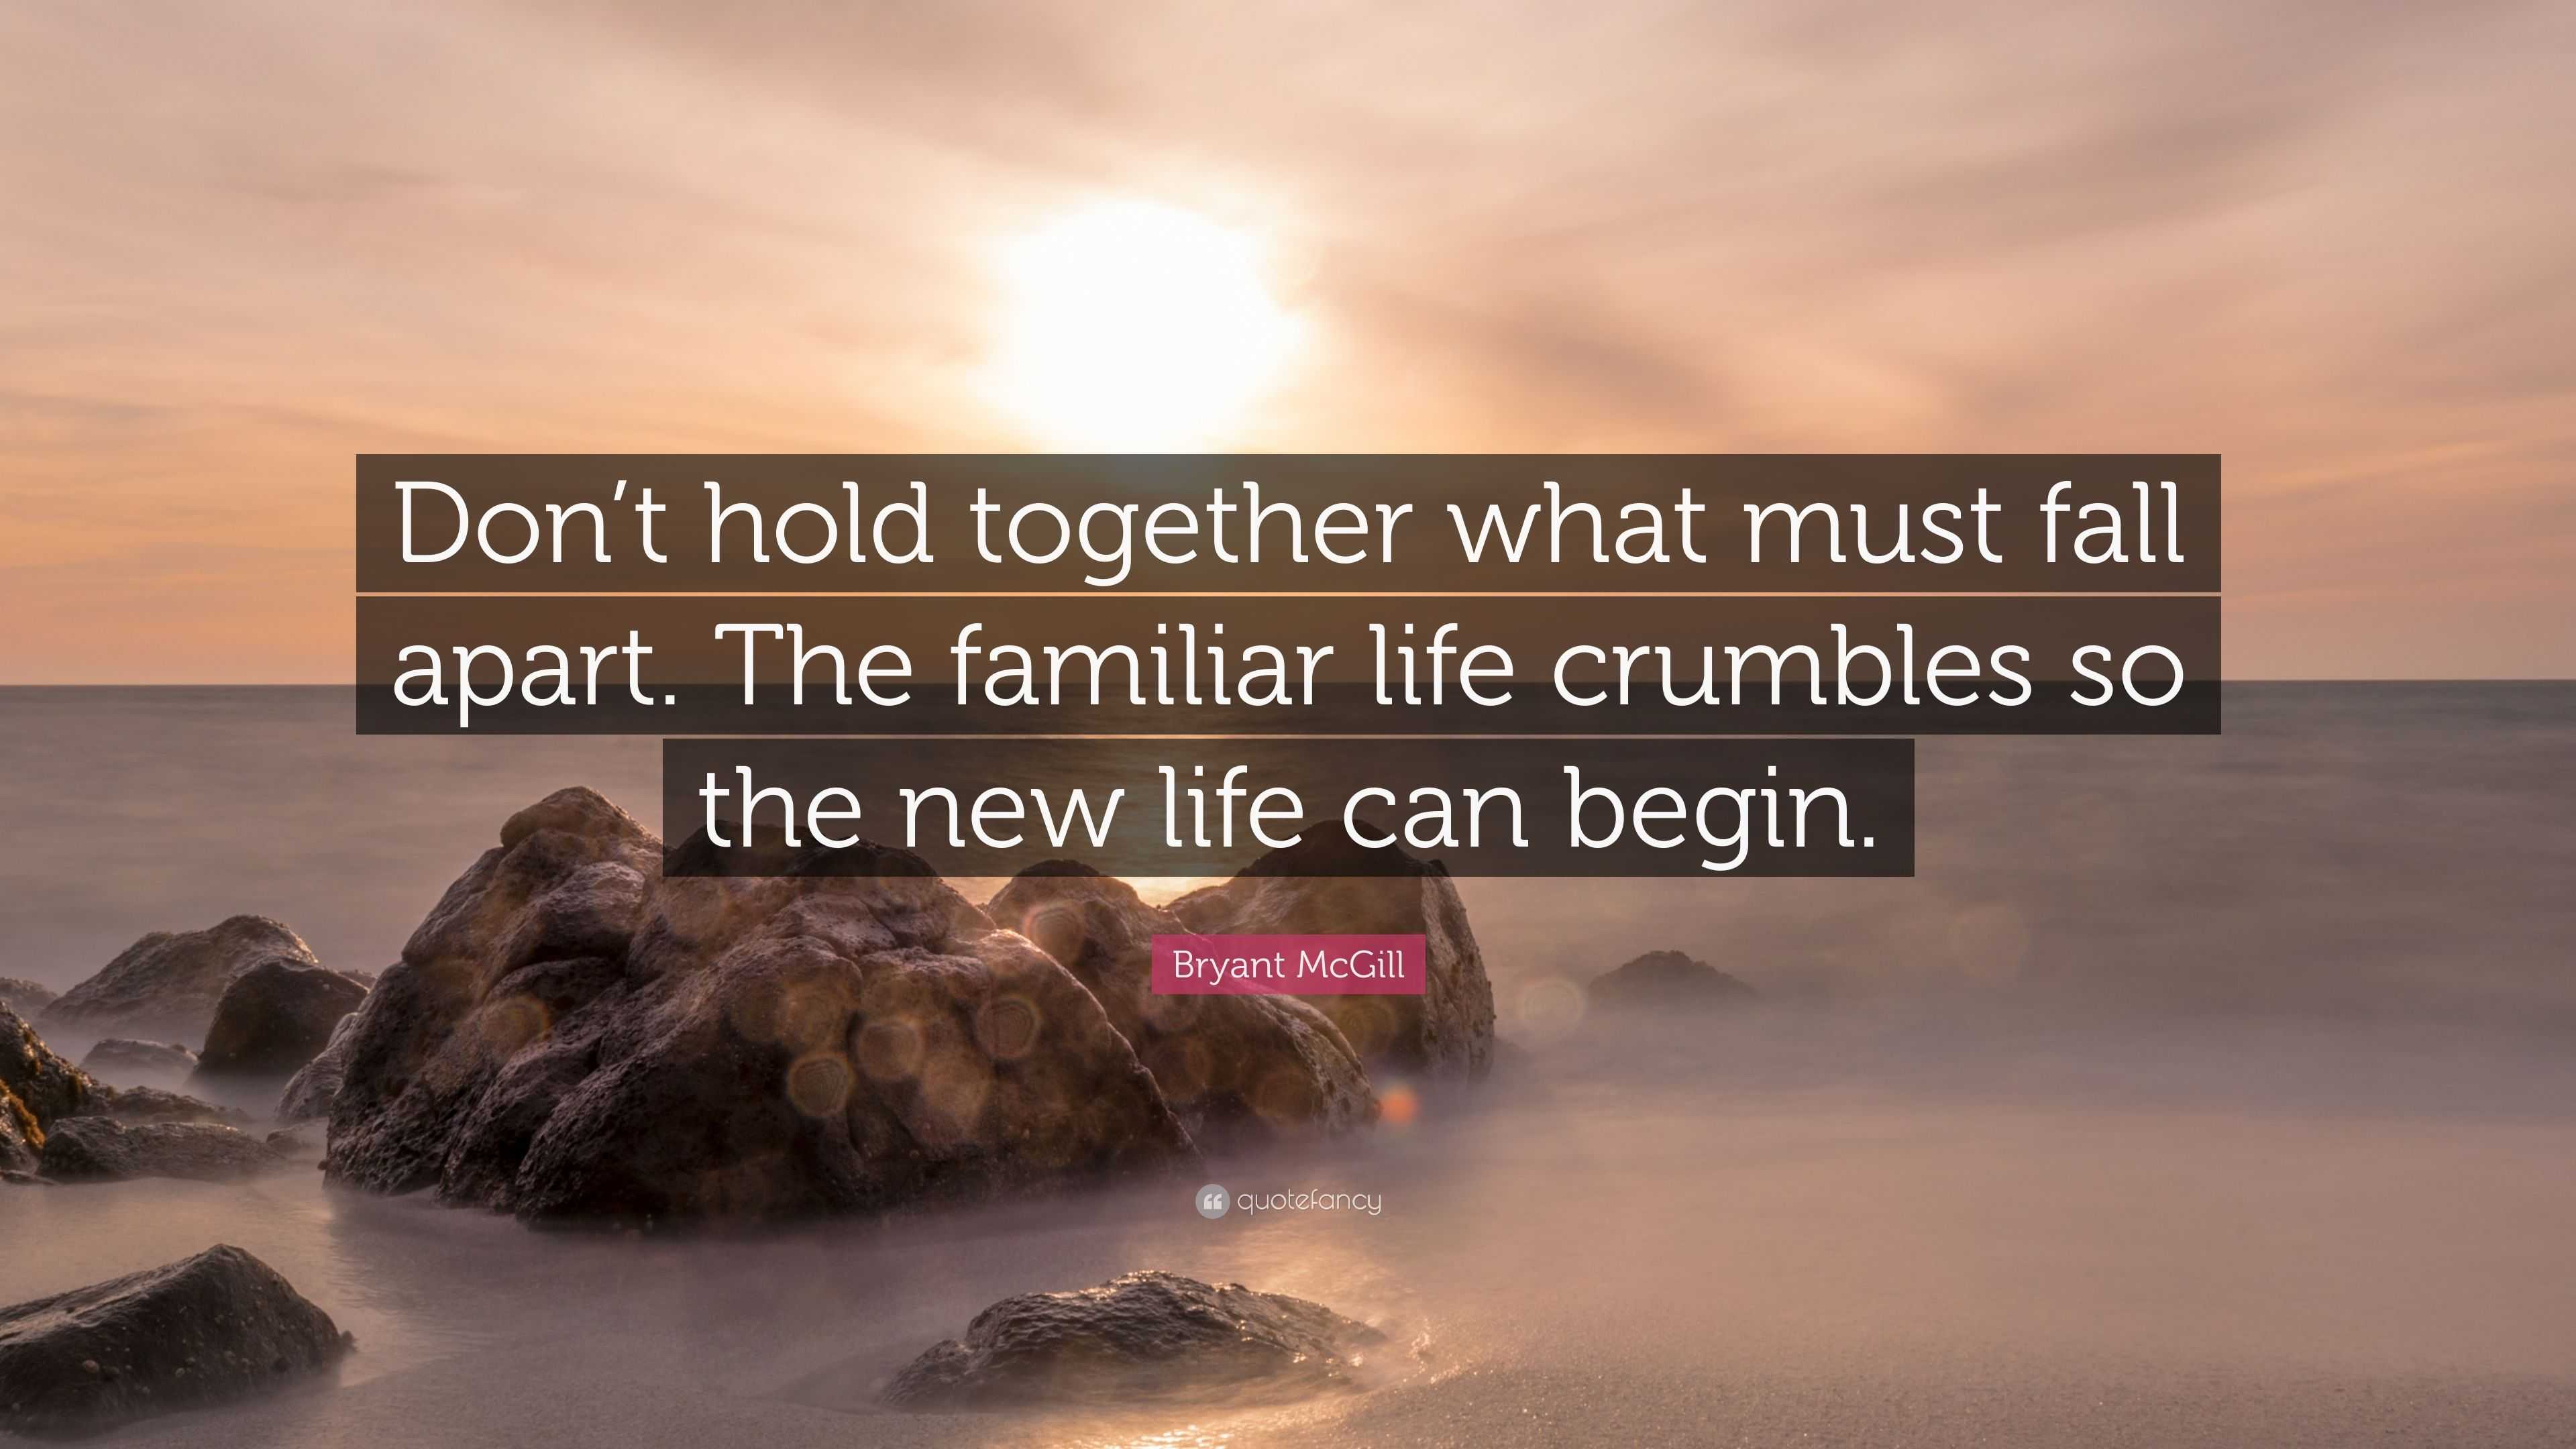 begin new life quotes bryant mcgill quote u201cdon u0027t hold to her what must fall apart